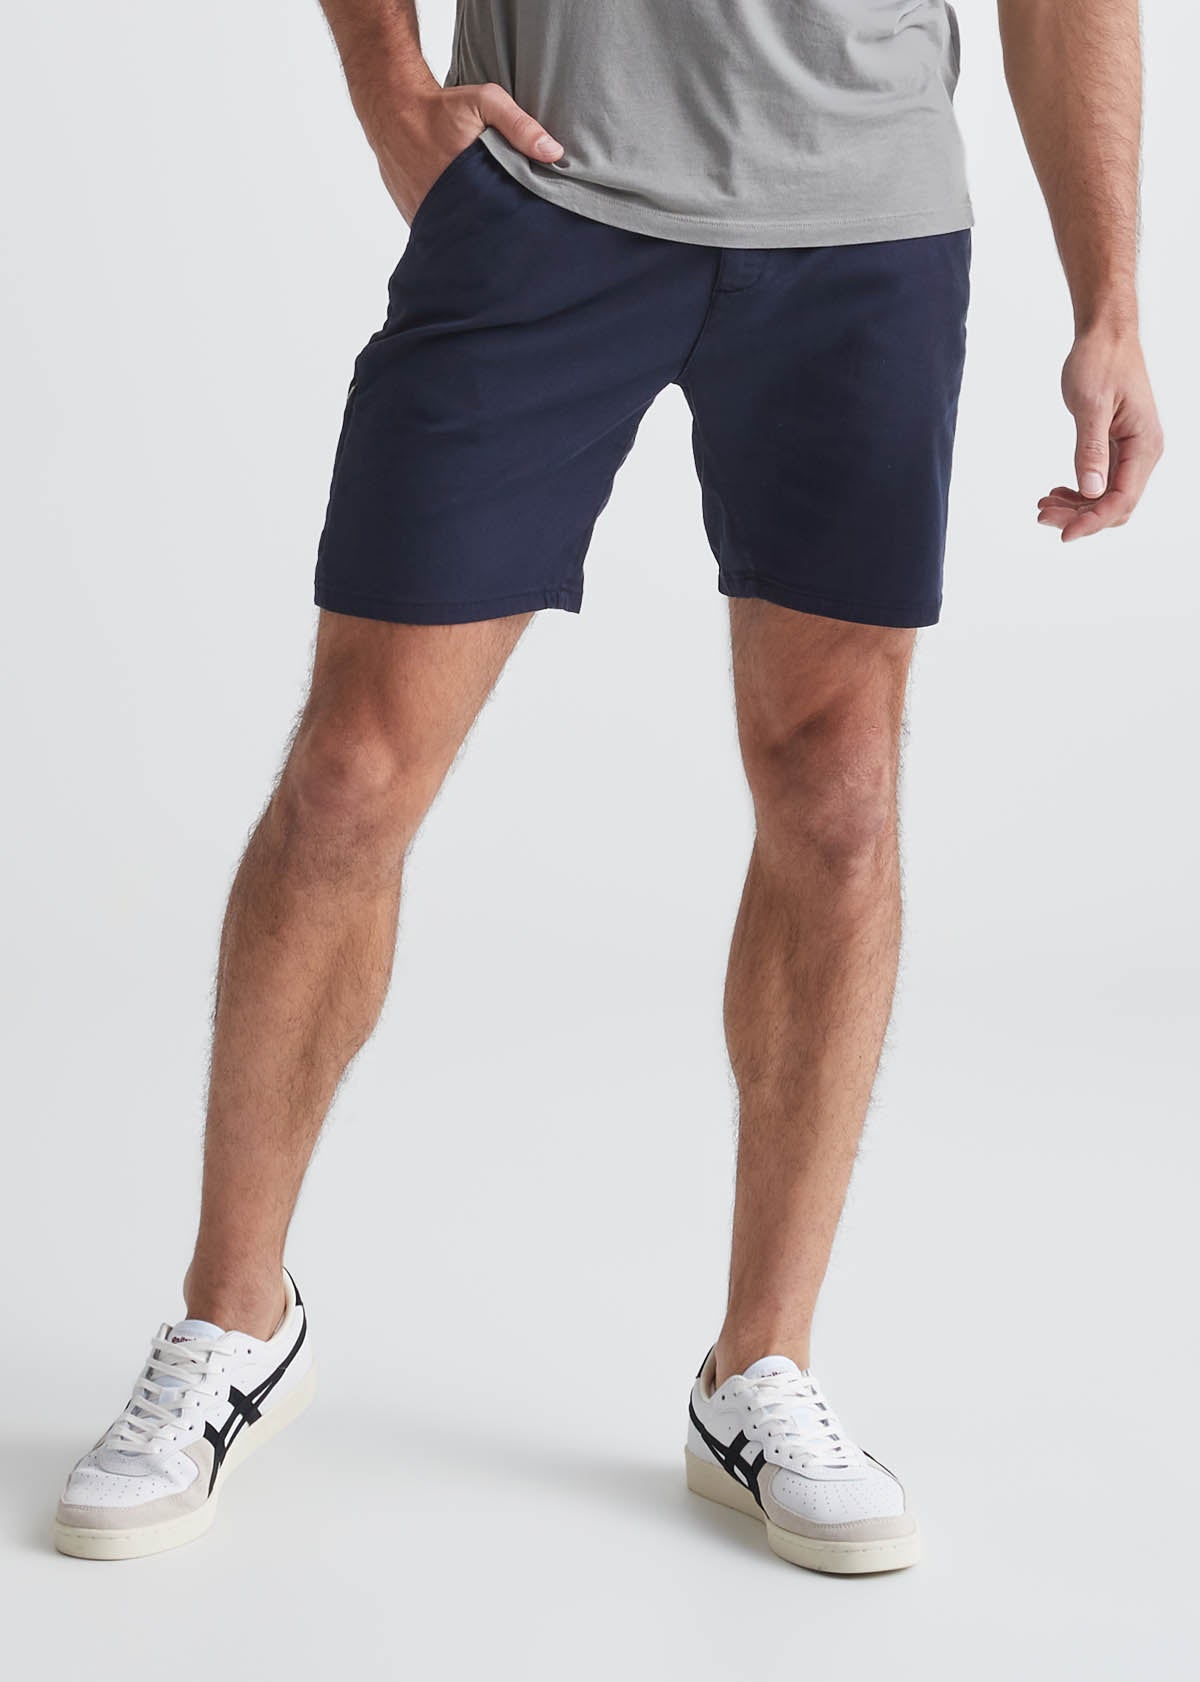 Men's Loose Fit 5-inch Inseam Shorts For Summer Casual Style, Breathable  And Thin Material